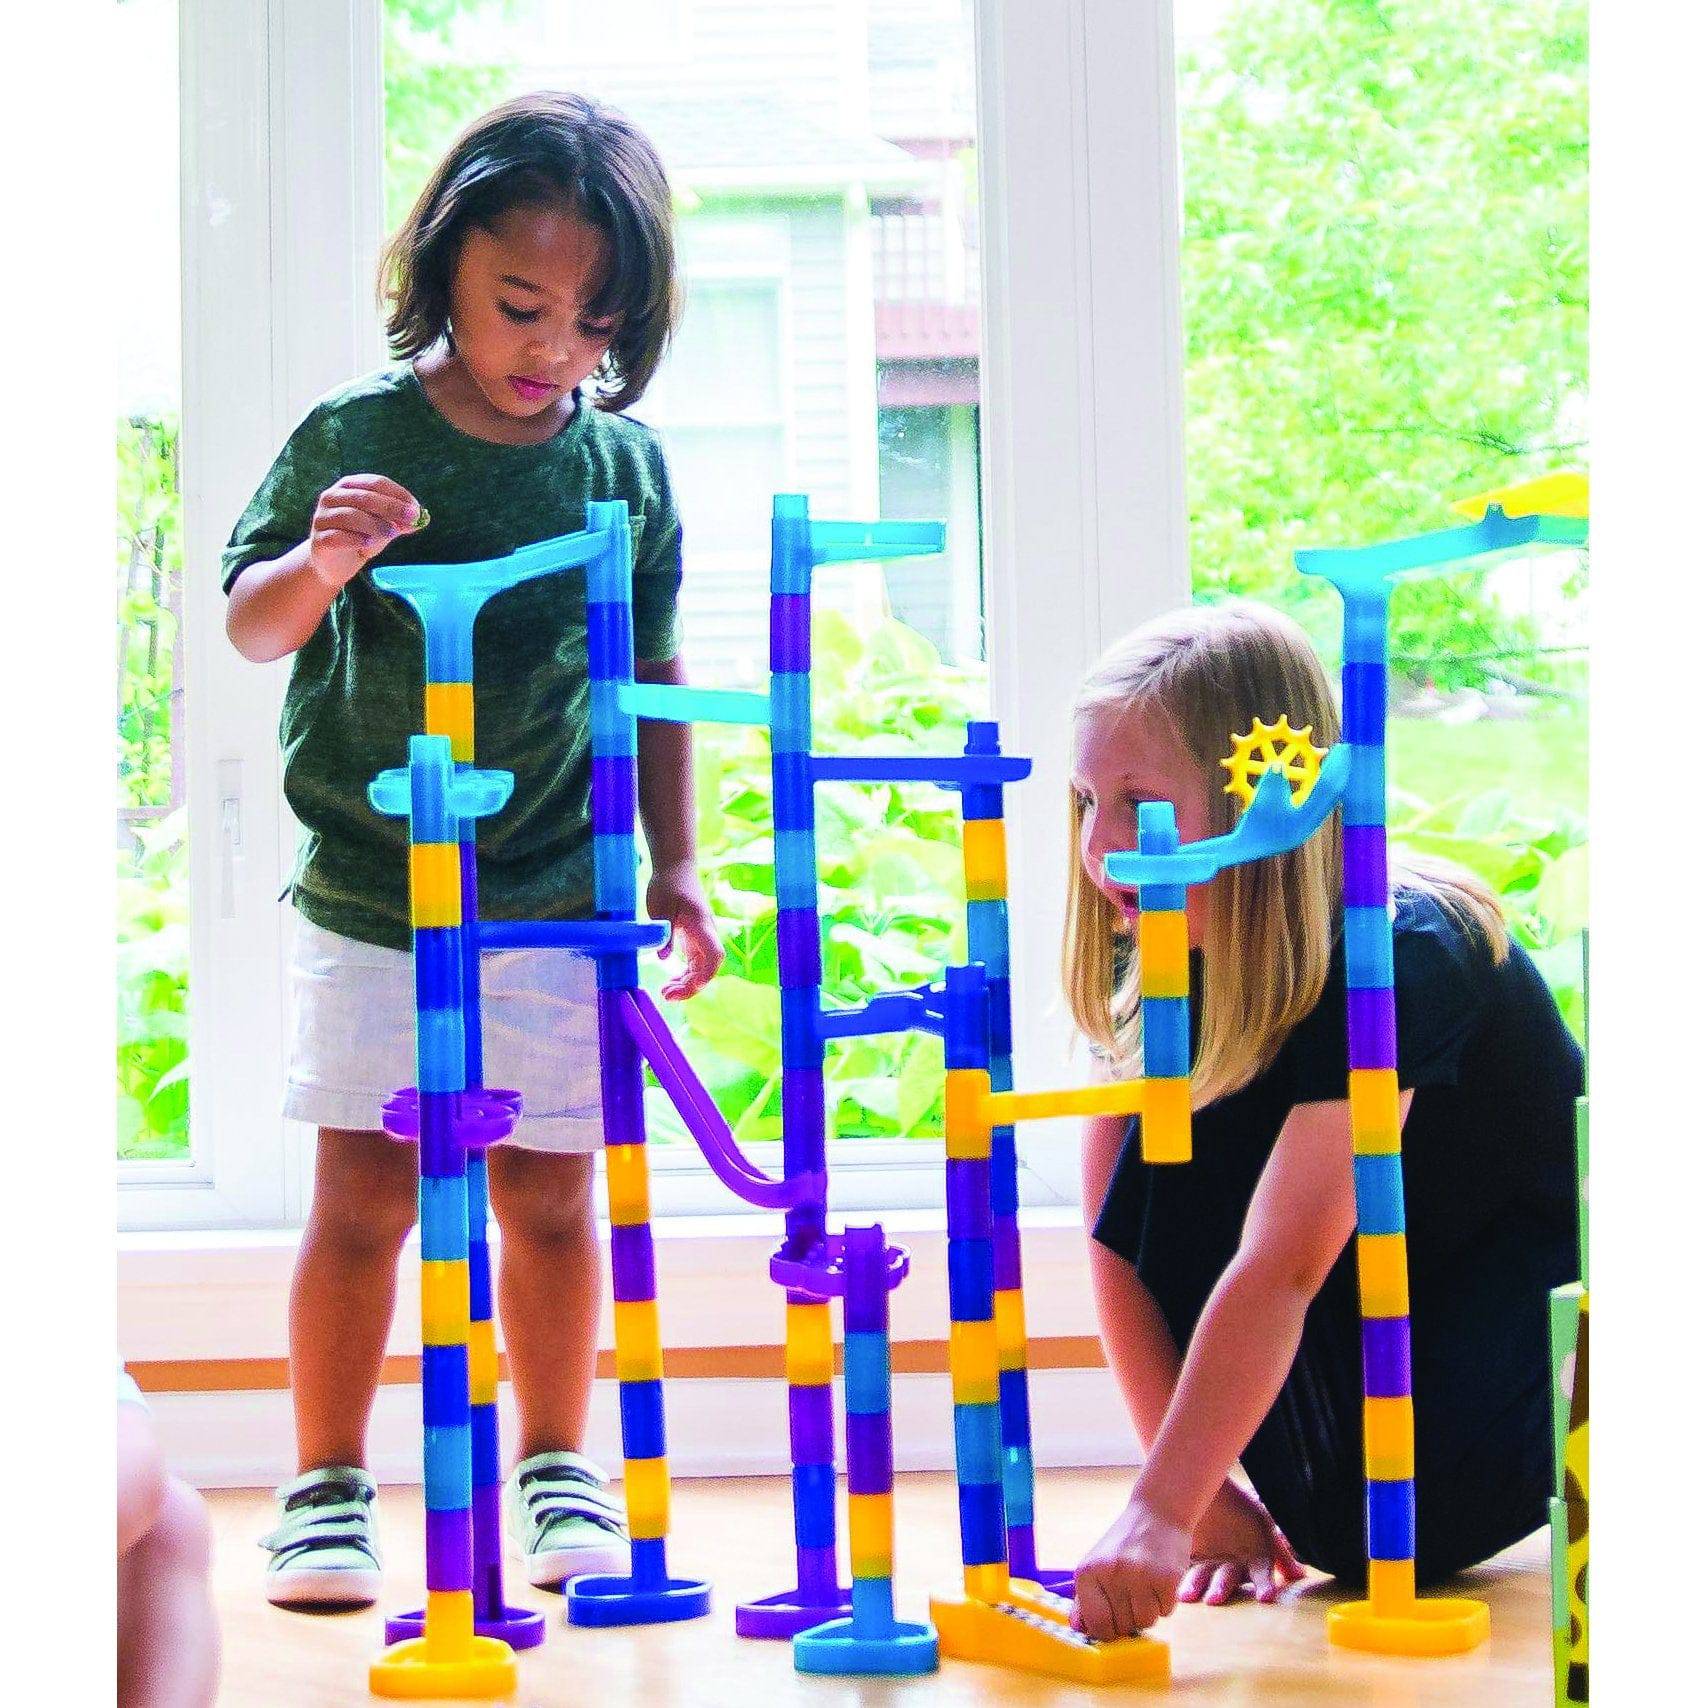 MARBLEWORKS ULTRA GRAND PRIX SET Racing Marble Run Track - Discovery Toys